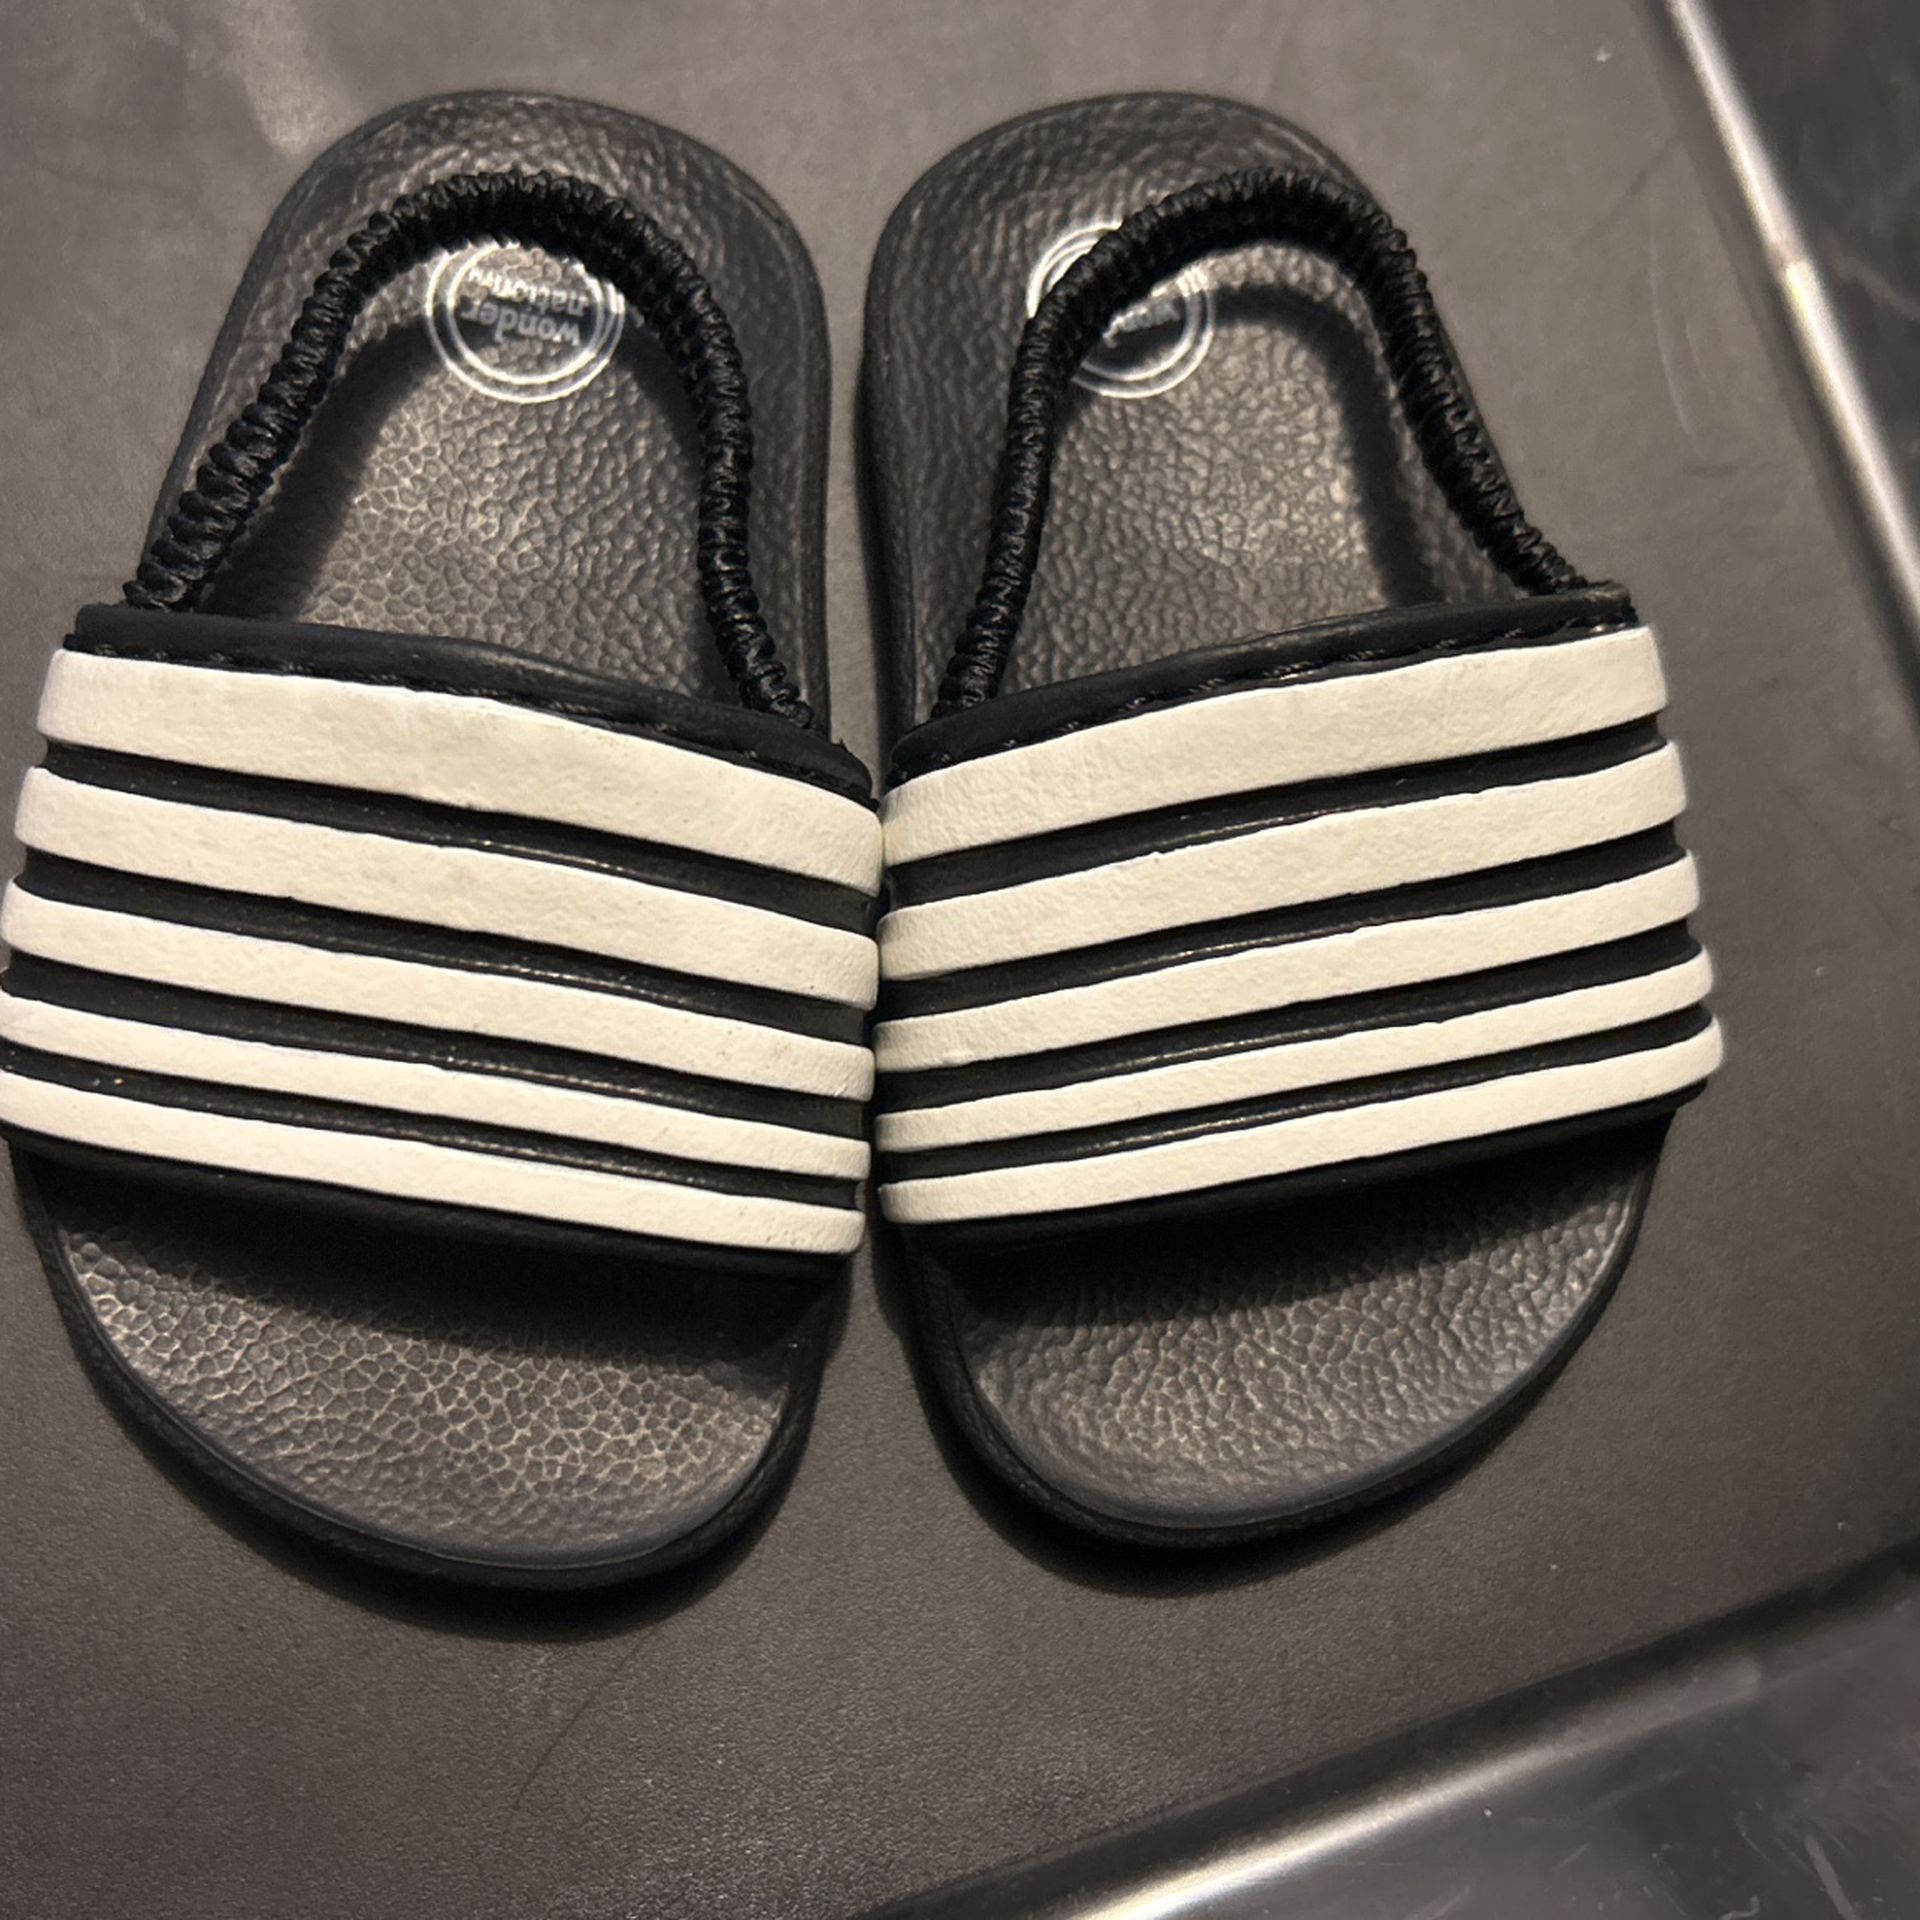 Water shoes/slides